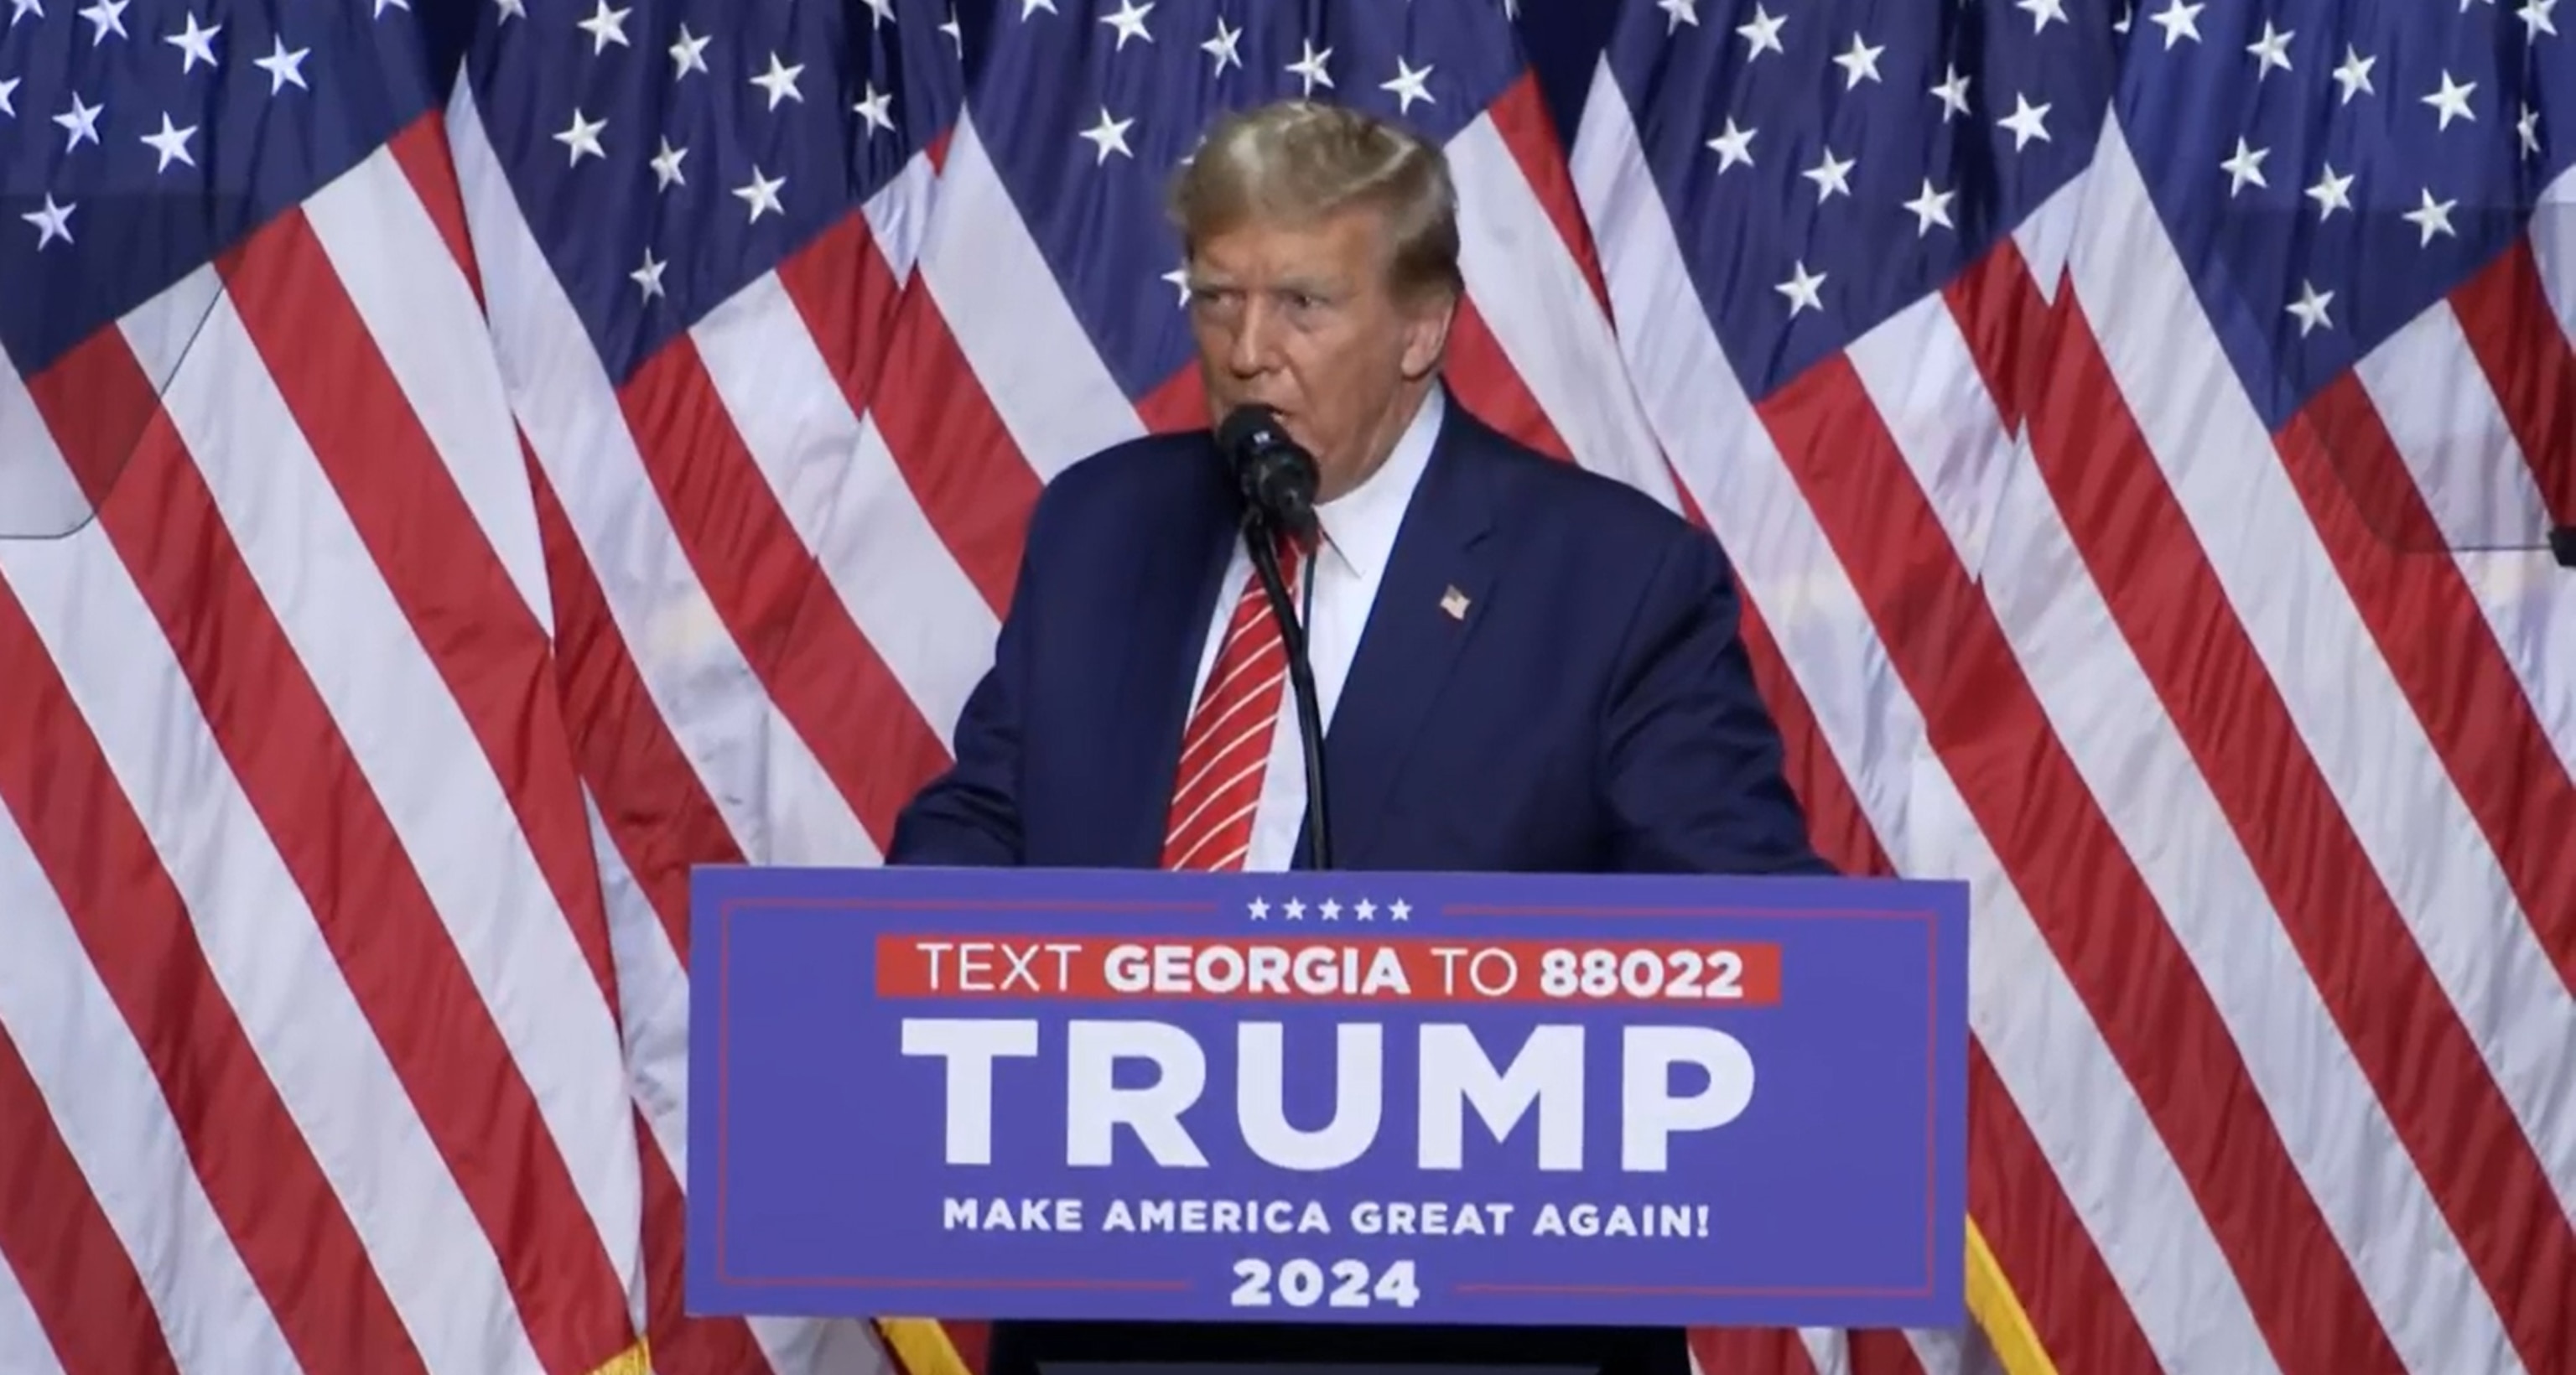 PHOTO: Former President Donald Trump speaks at a rally in Rome, Georgia, on March 9, 2024.